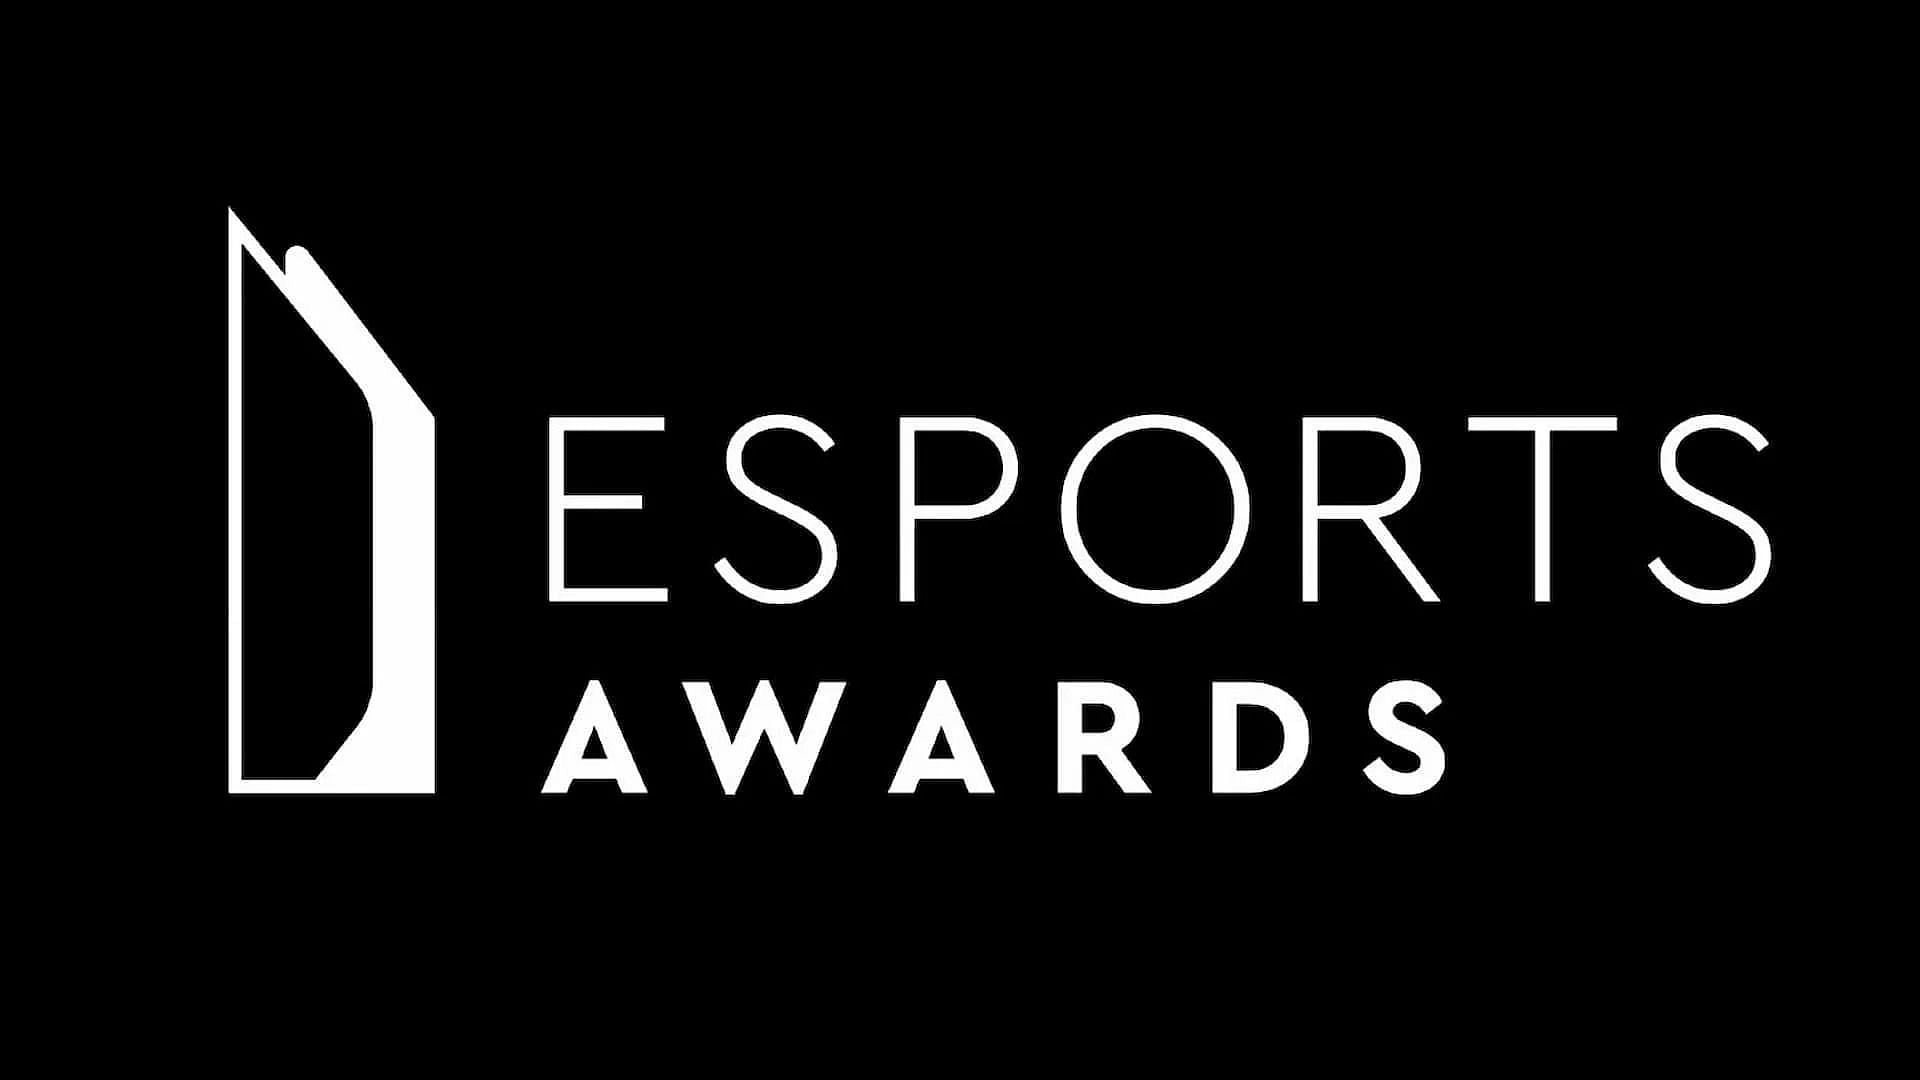 Esports Awards: MLBB wins Esports Mobile Game of the Year